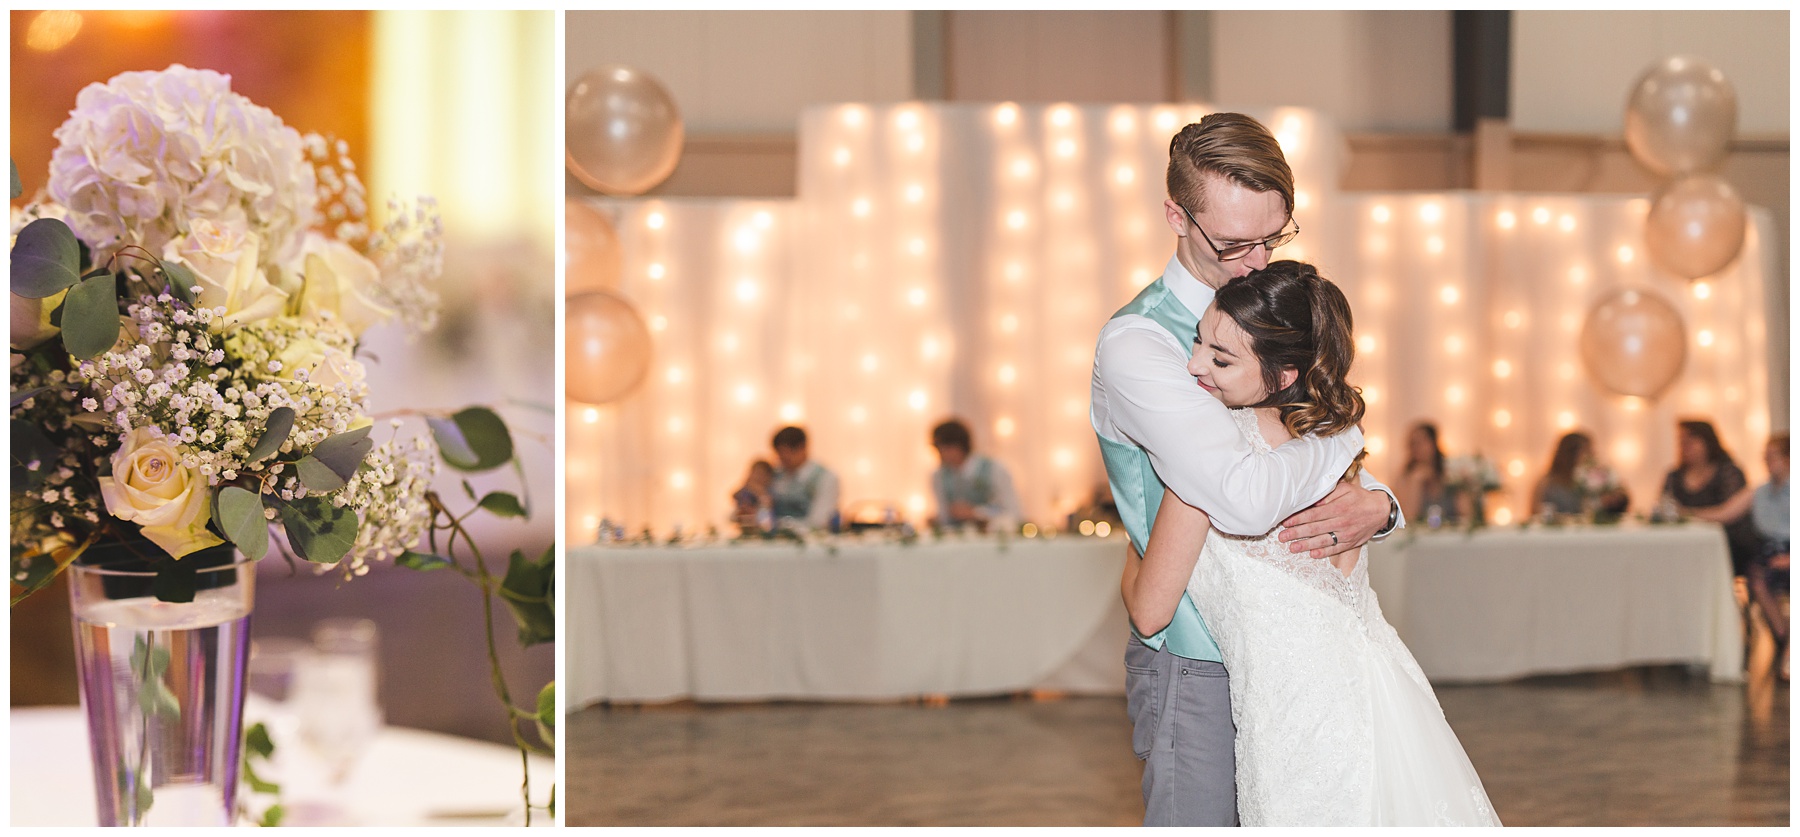 Bride and groom first dance at their wedding reception Inspiration